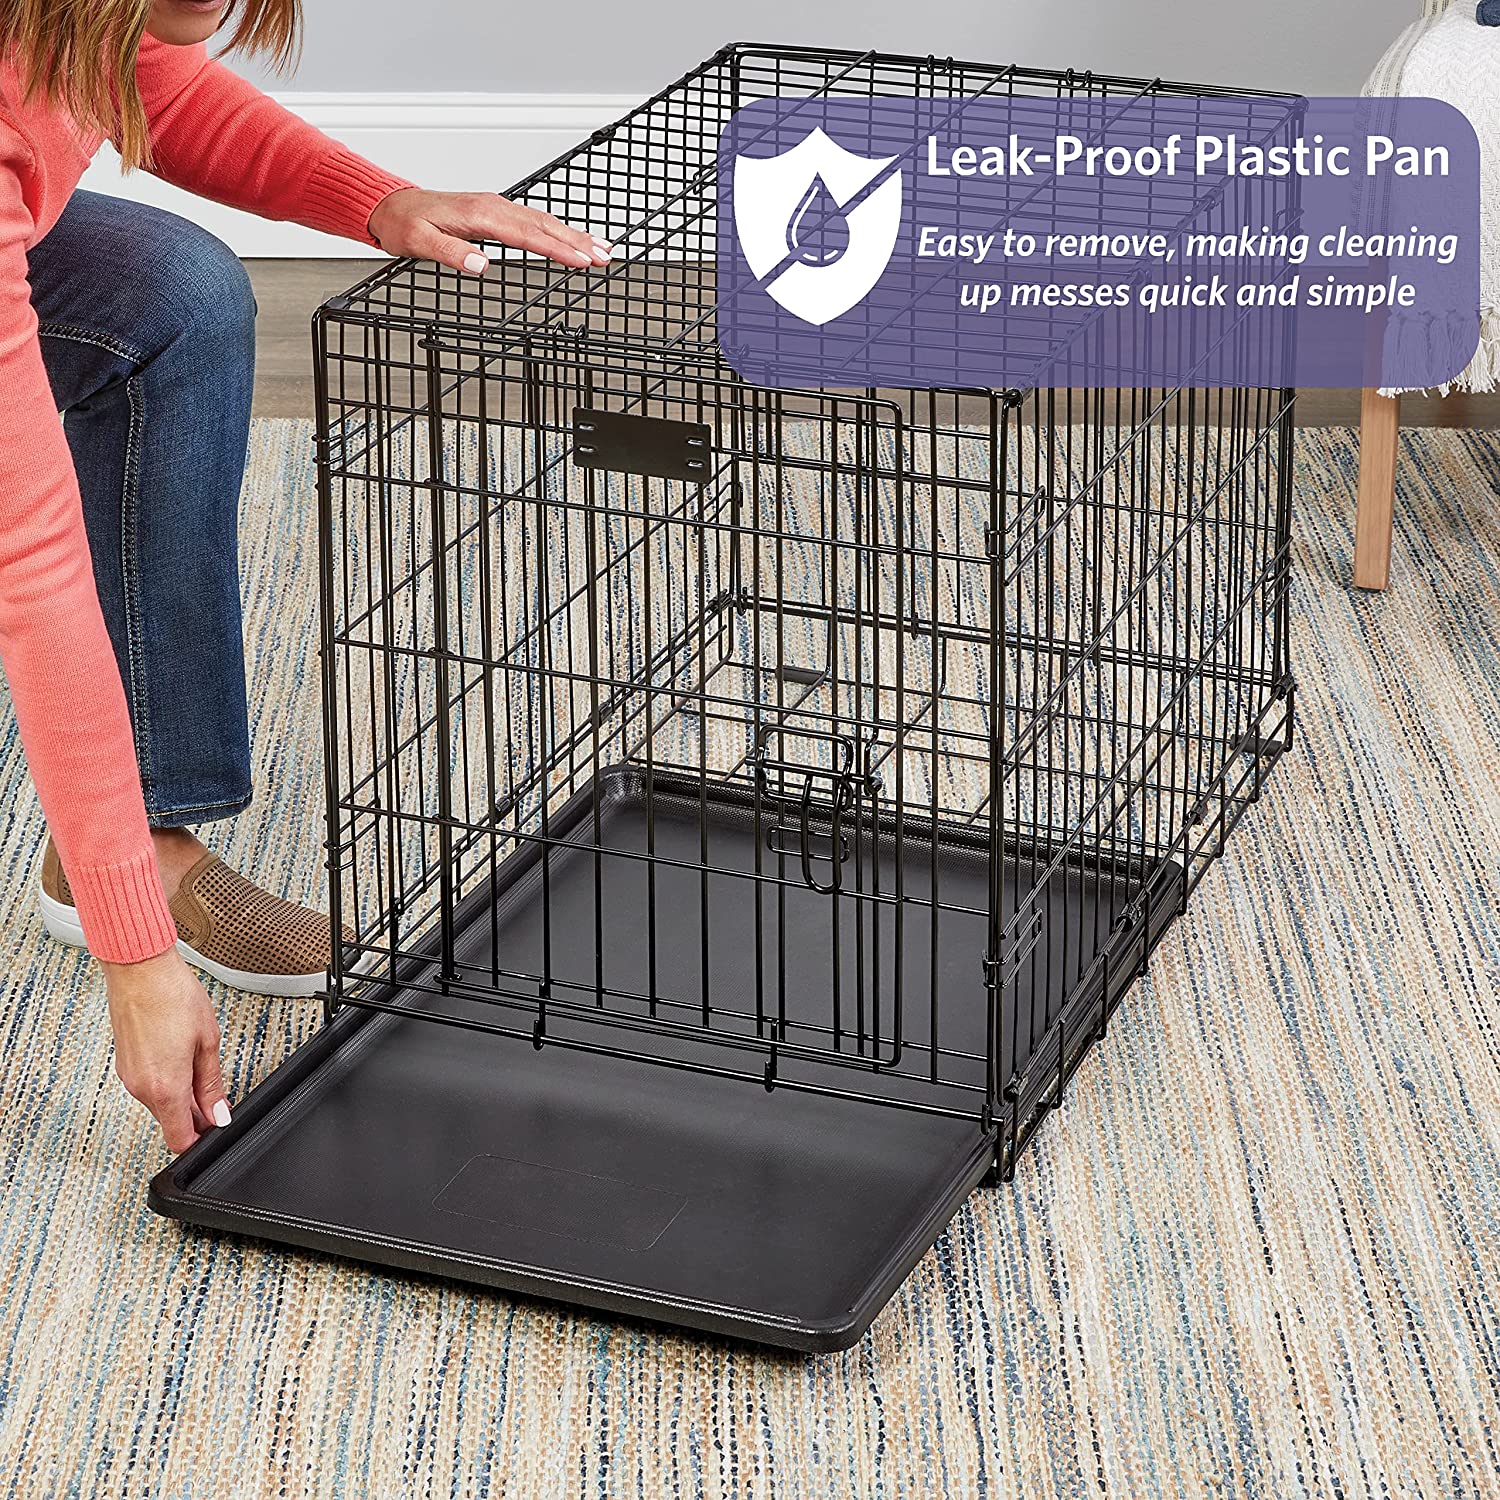 MidWest iCrate 42in Folding Metal Dog Crate With Divider Panel For Large Dog